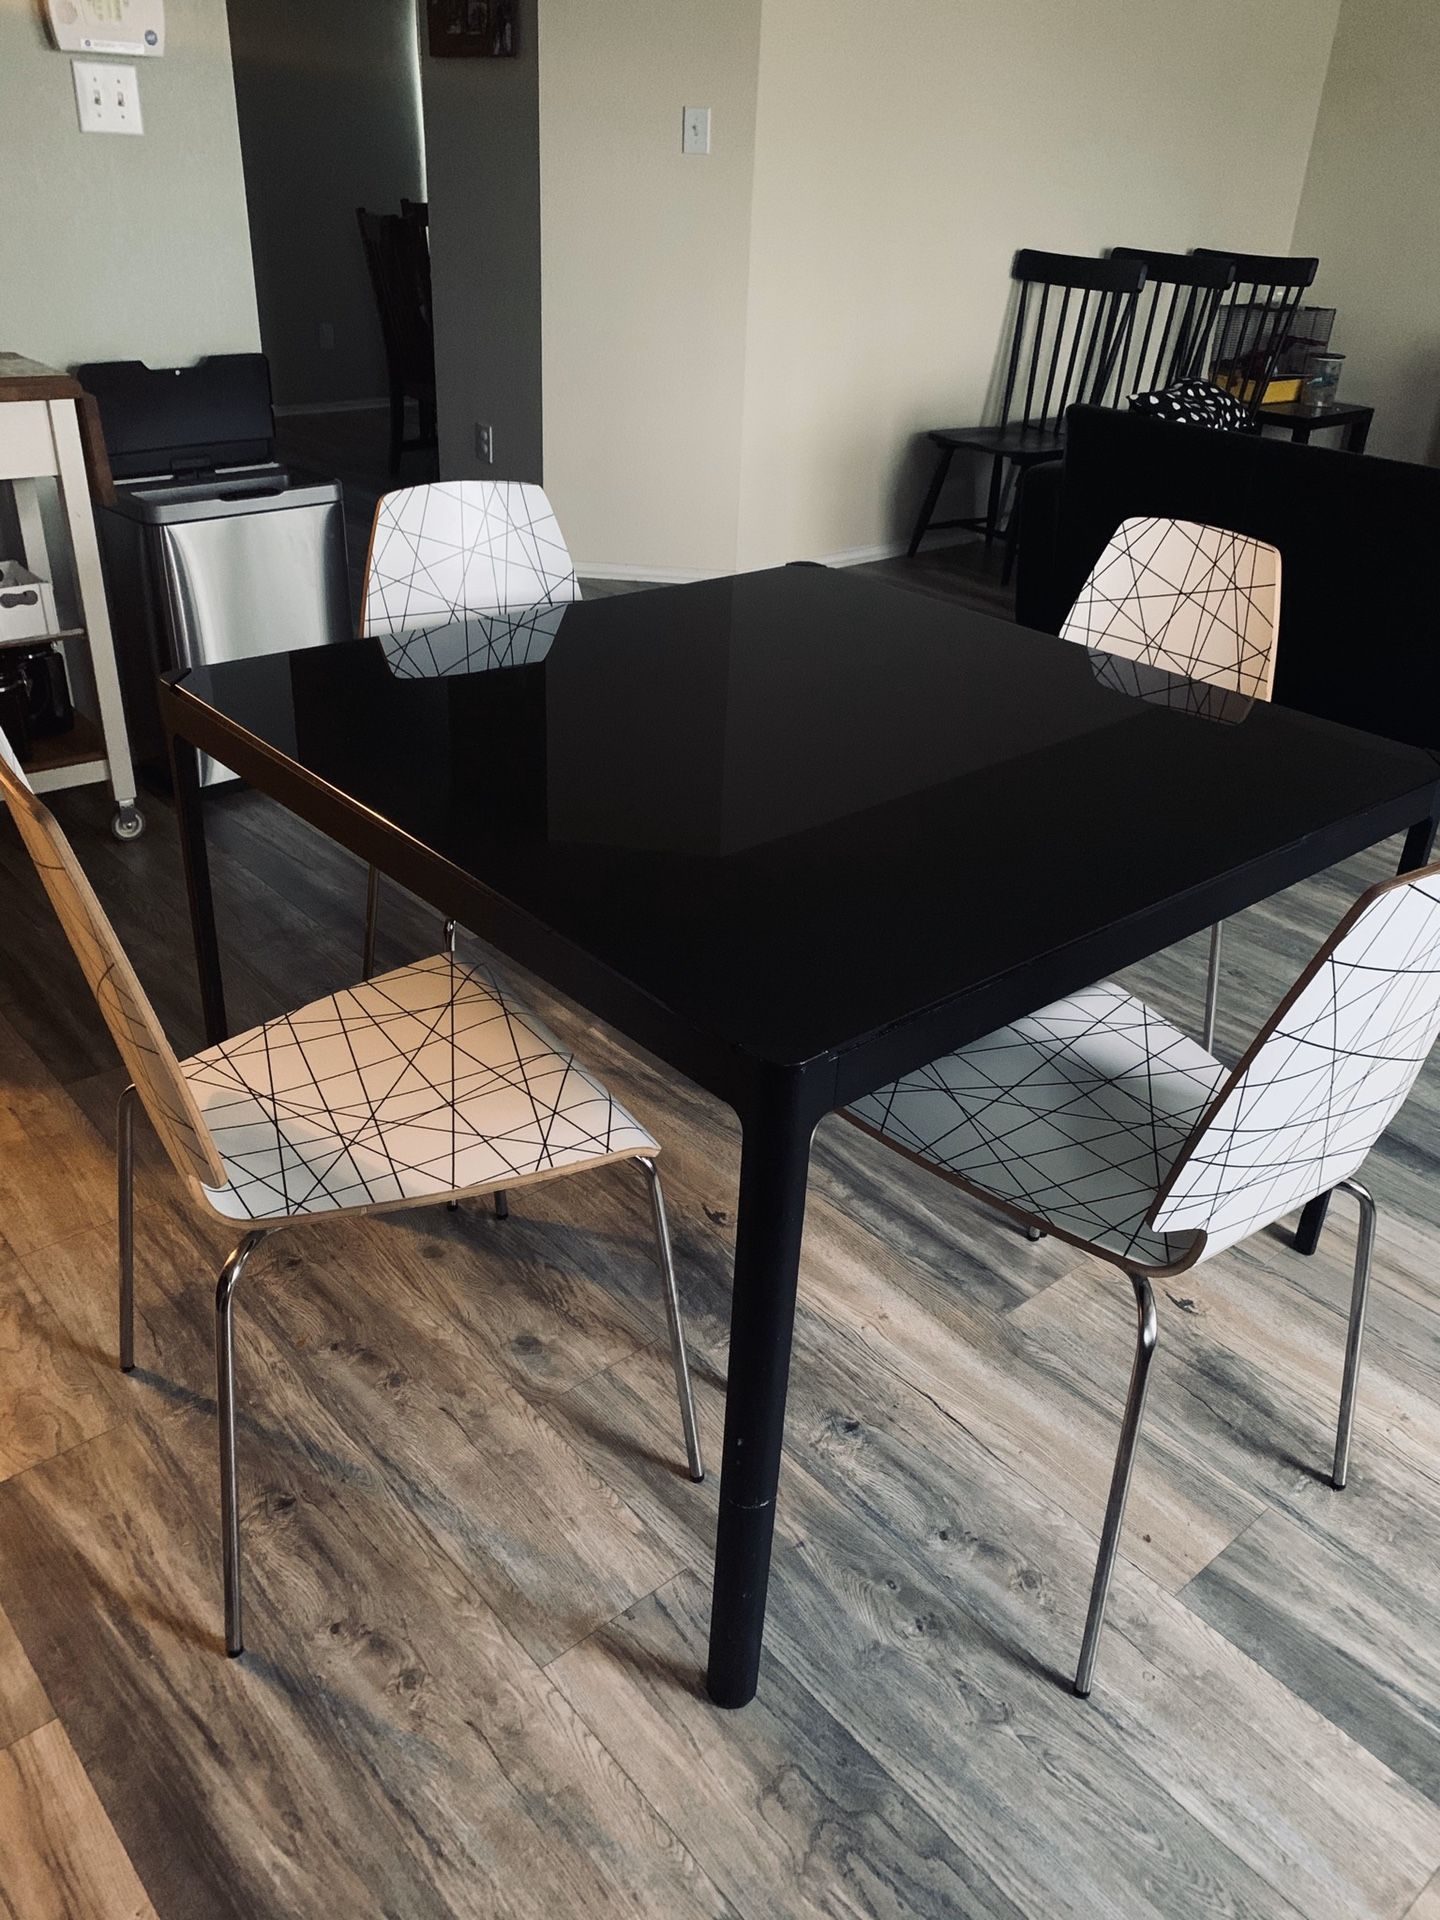 Dinning /breakfast table with chairs